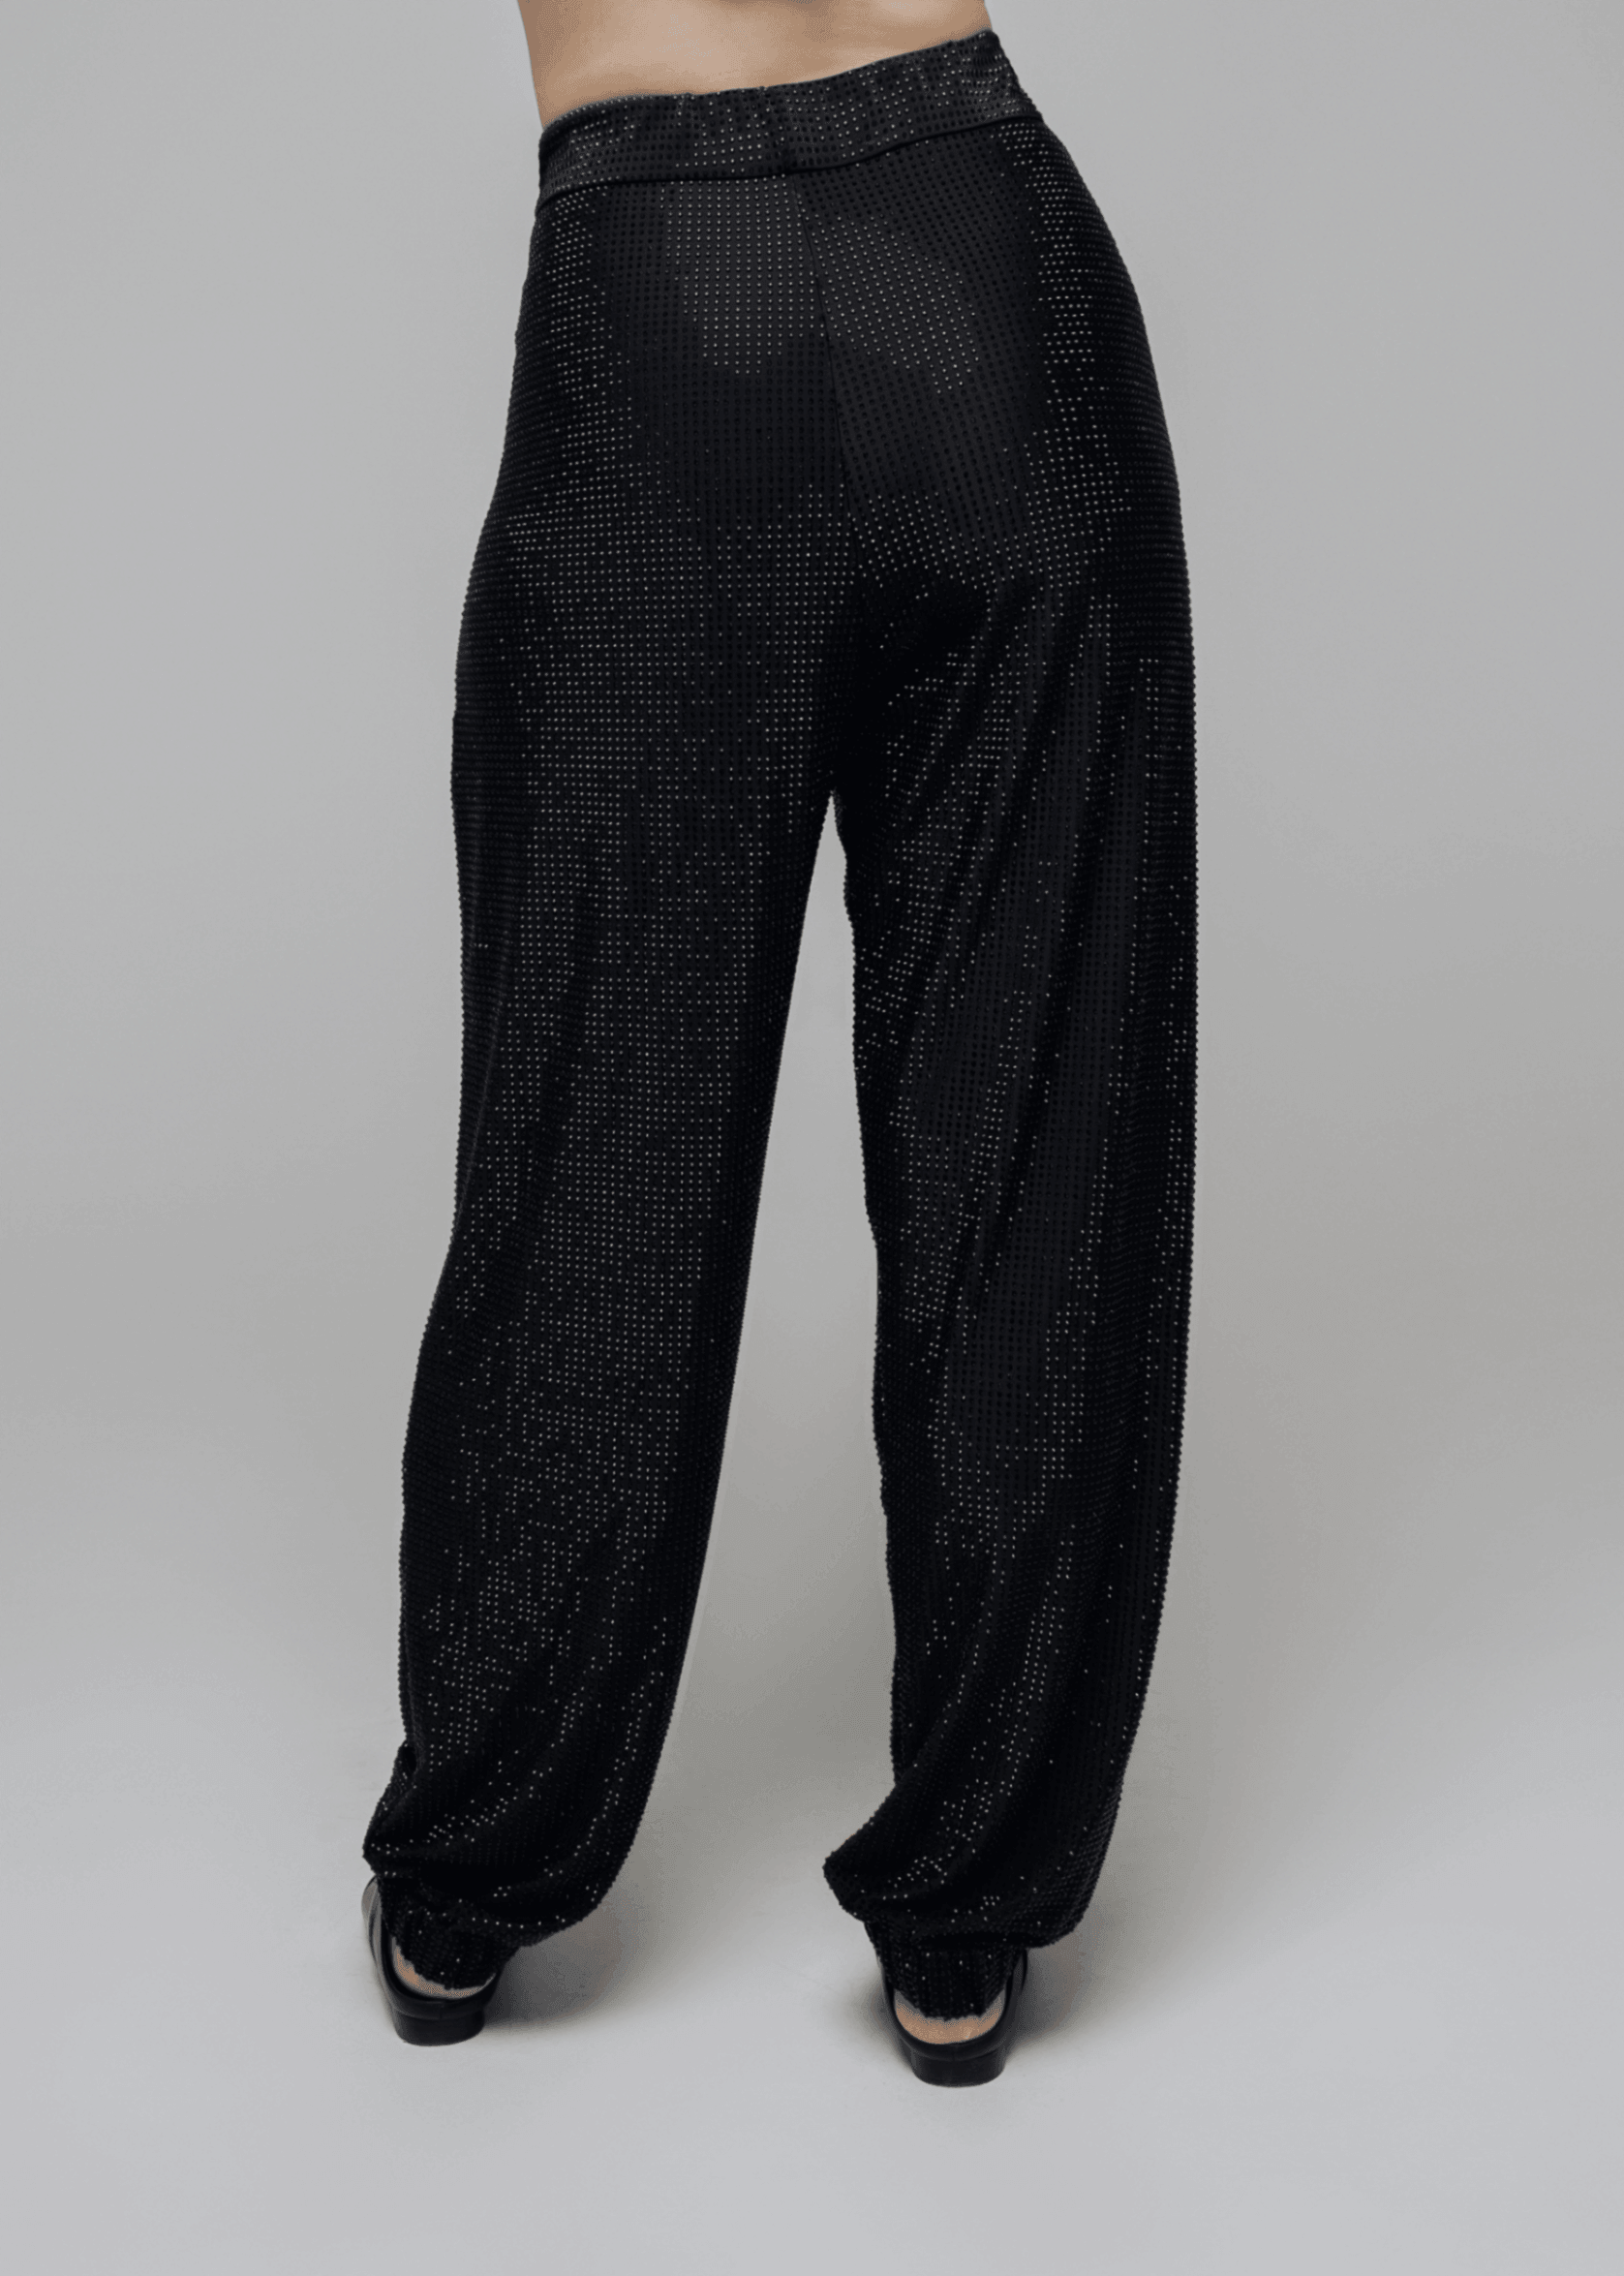 Exquisite detail of Crystal Harem Pants showcasing the fine craftsmanship and elegant design characteristic of Axinia Collection 's luxury collection.